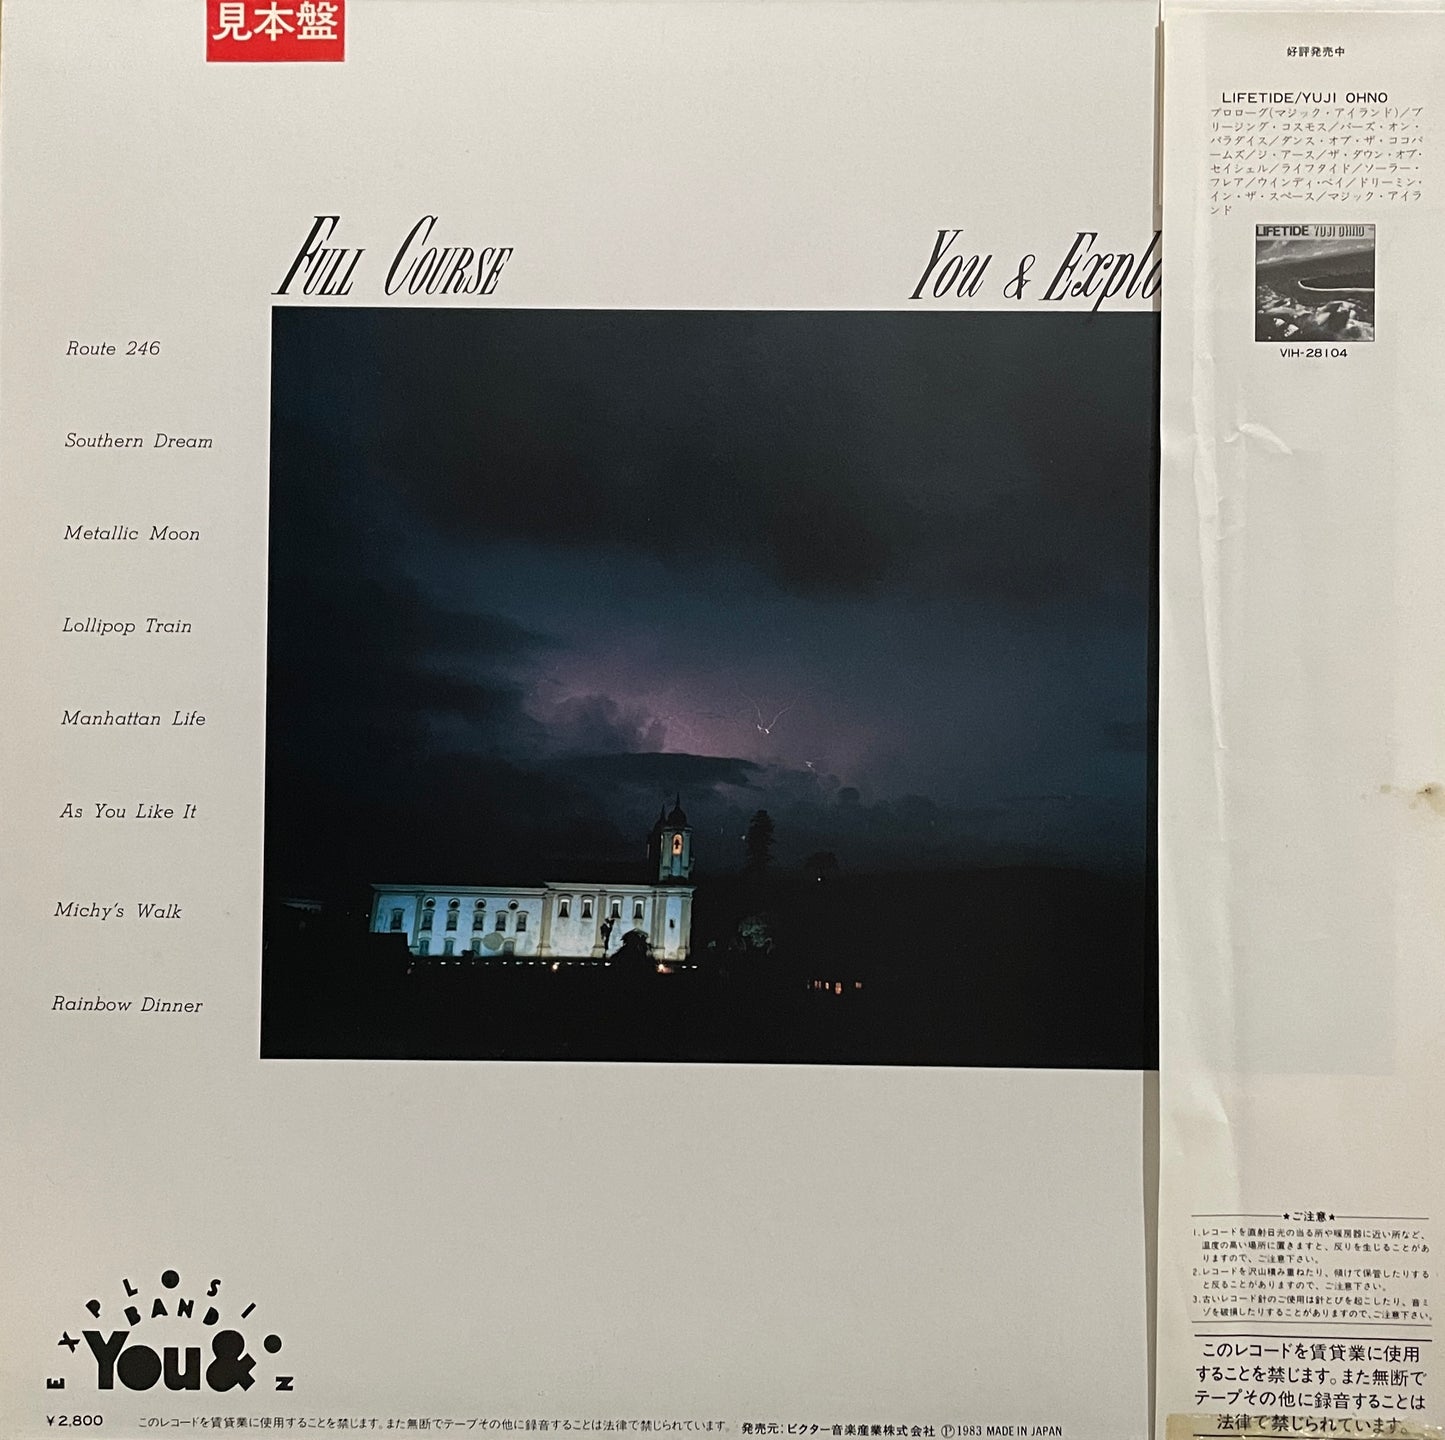 Yuji Onho (You & The Explosion Band) "Full Course" (1983)